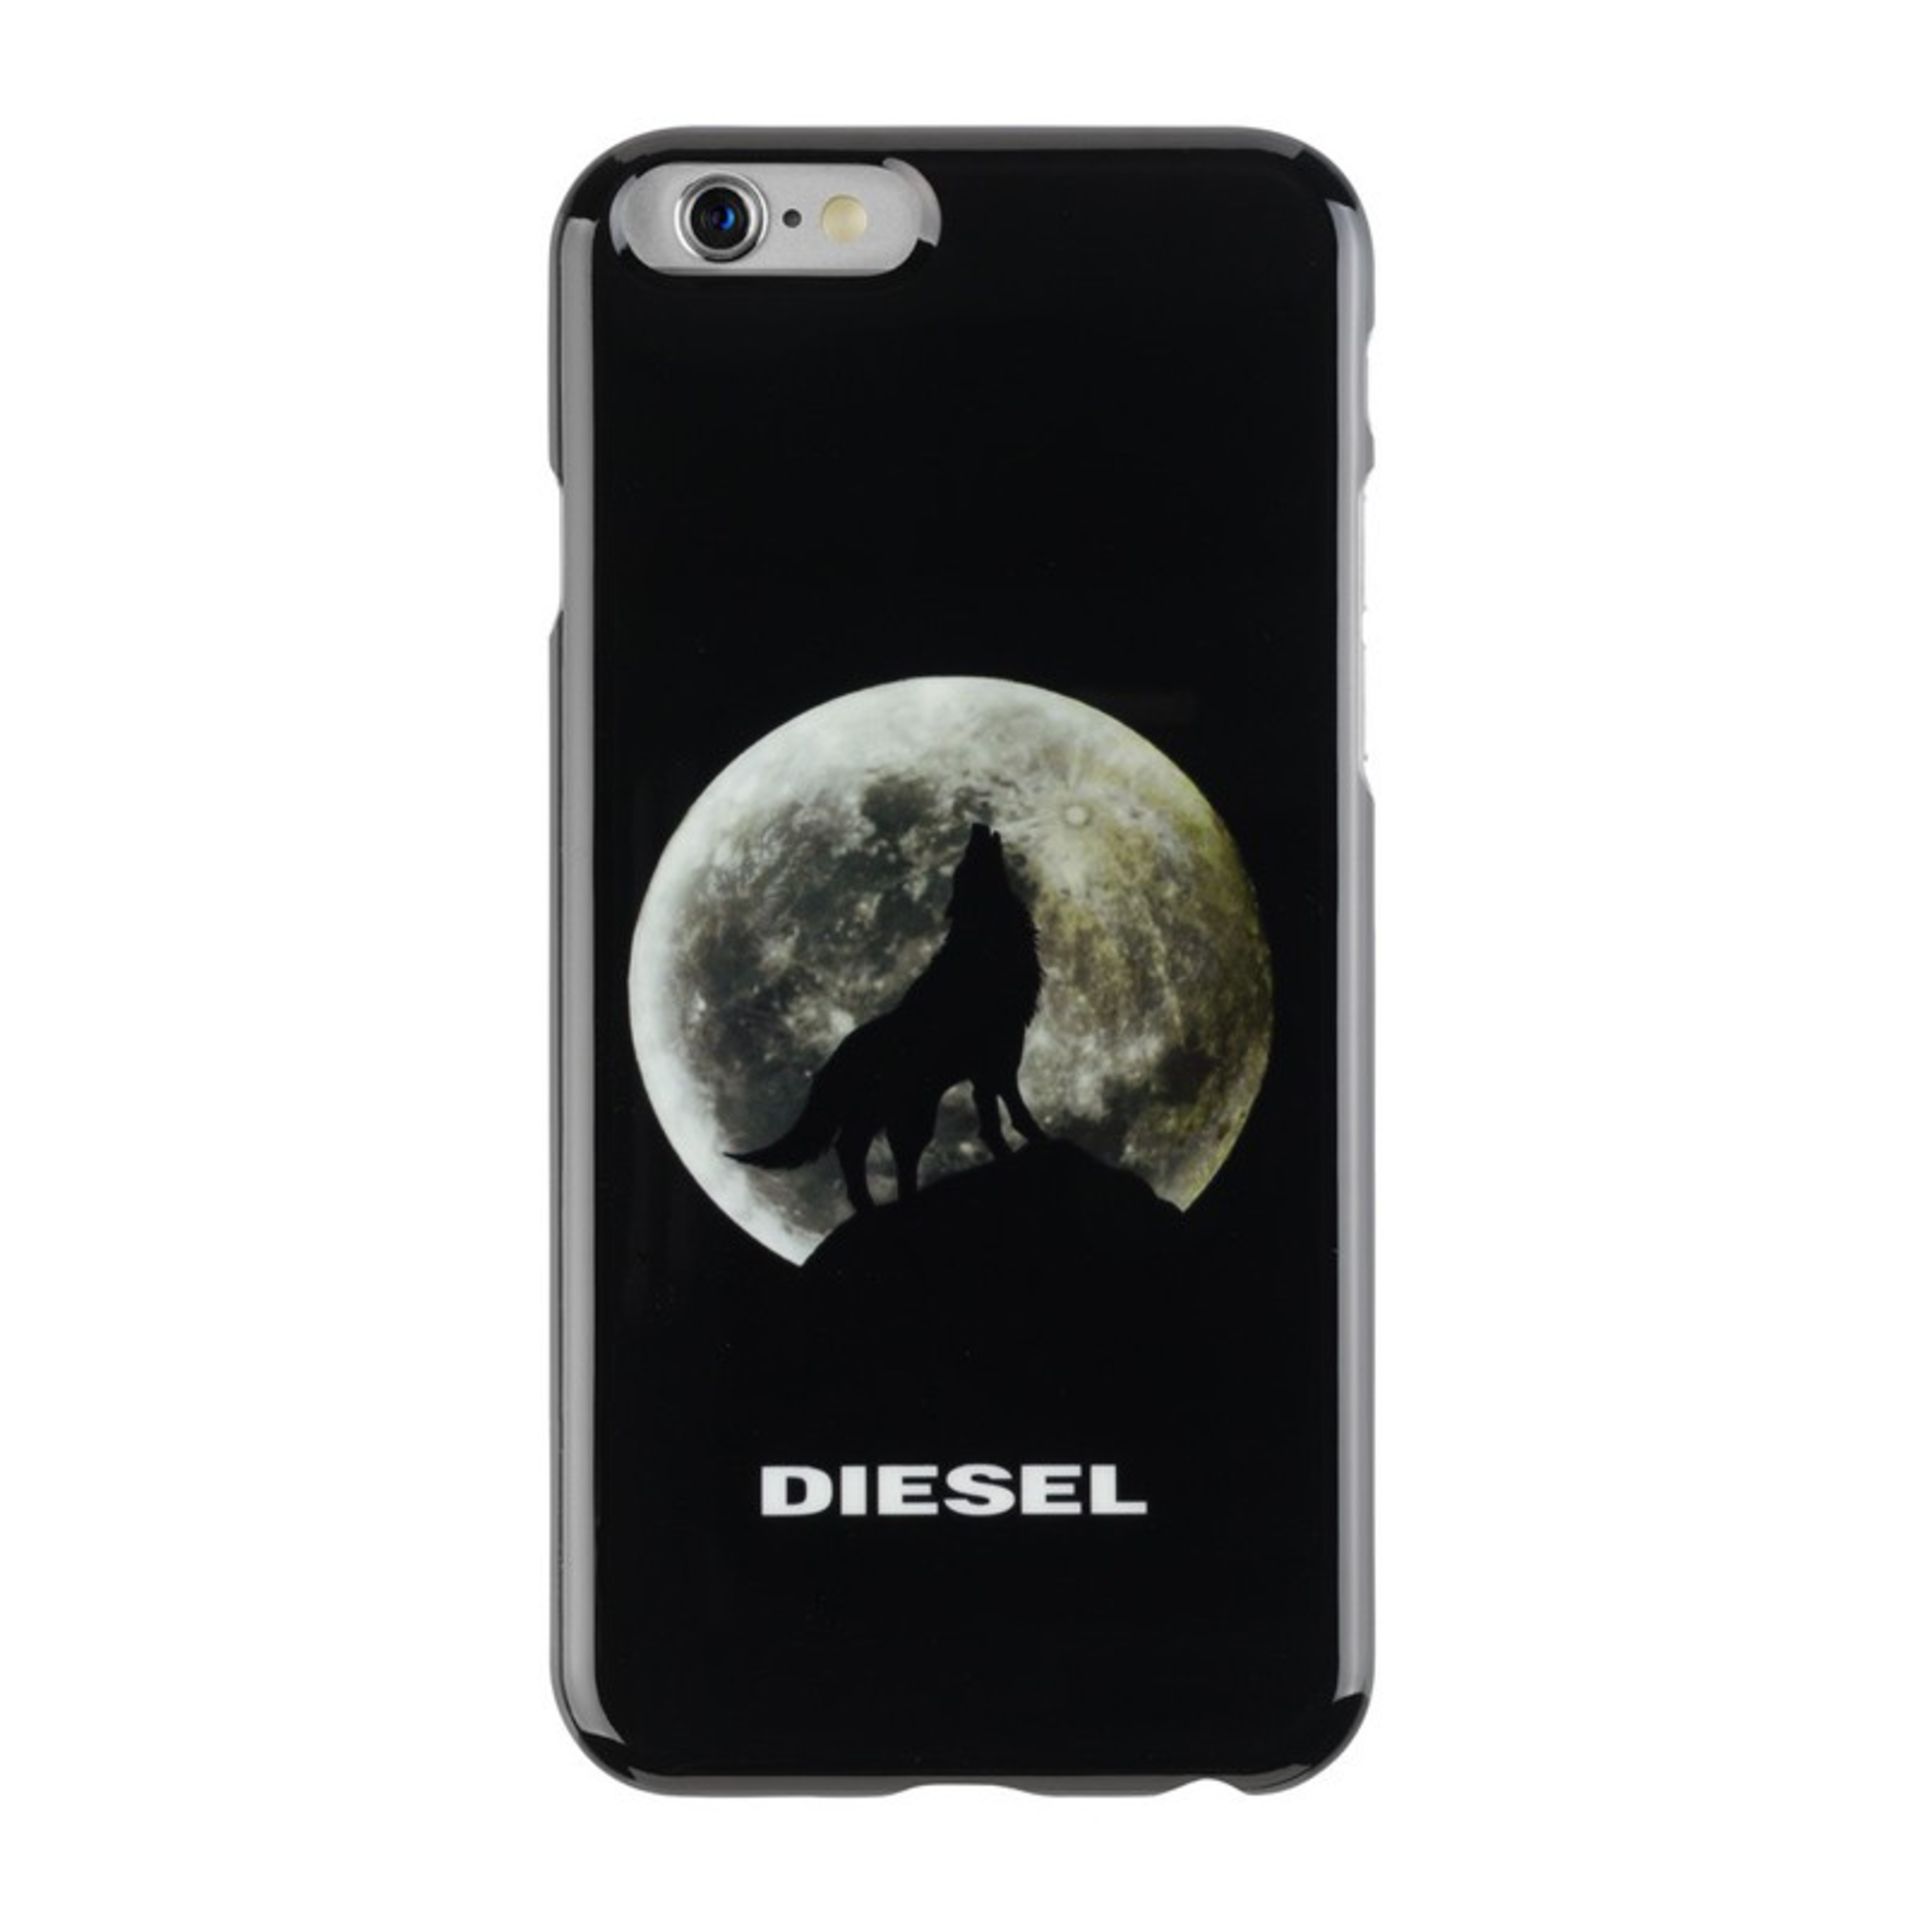 V *TRADE QTY* Brand New Diesel Pluton 6 Hard Snap Case For iPhone 6 ISP Price 19.90 Euros X 10